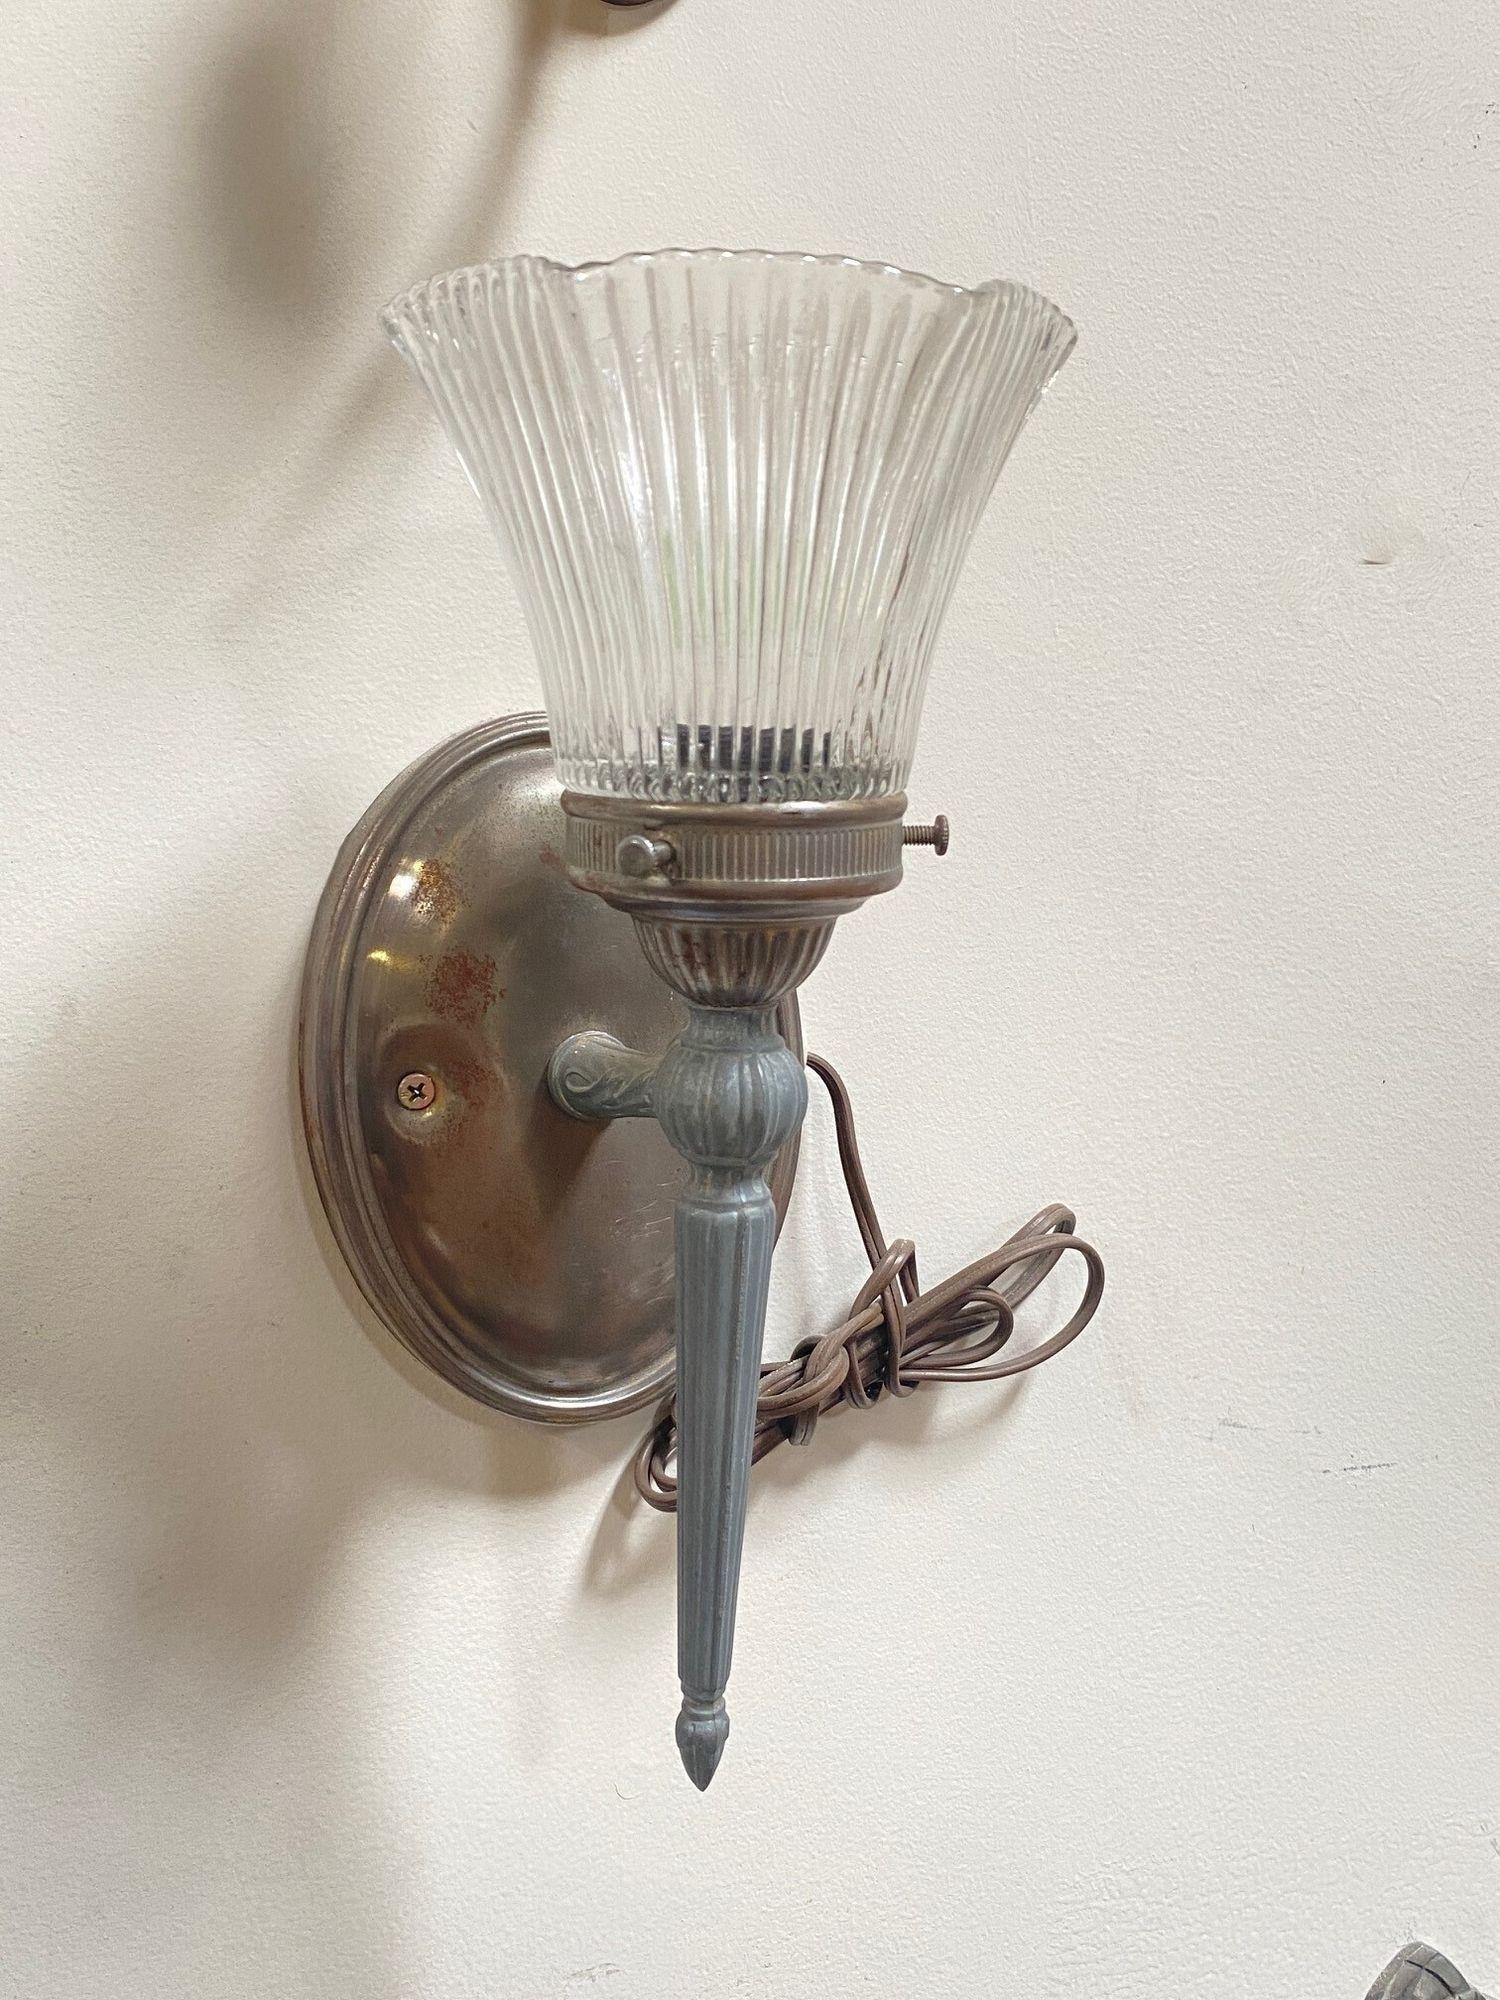 Antique regency speleter metal electric wall sconce with ripped glass globe. This torchiere-style scone features a touch fixed with ripped tulip glass shade fixed to an oval wall plate.

1920, United States